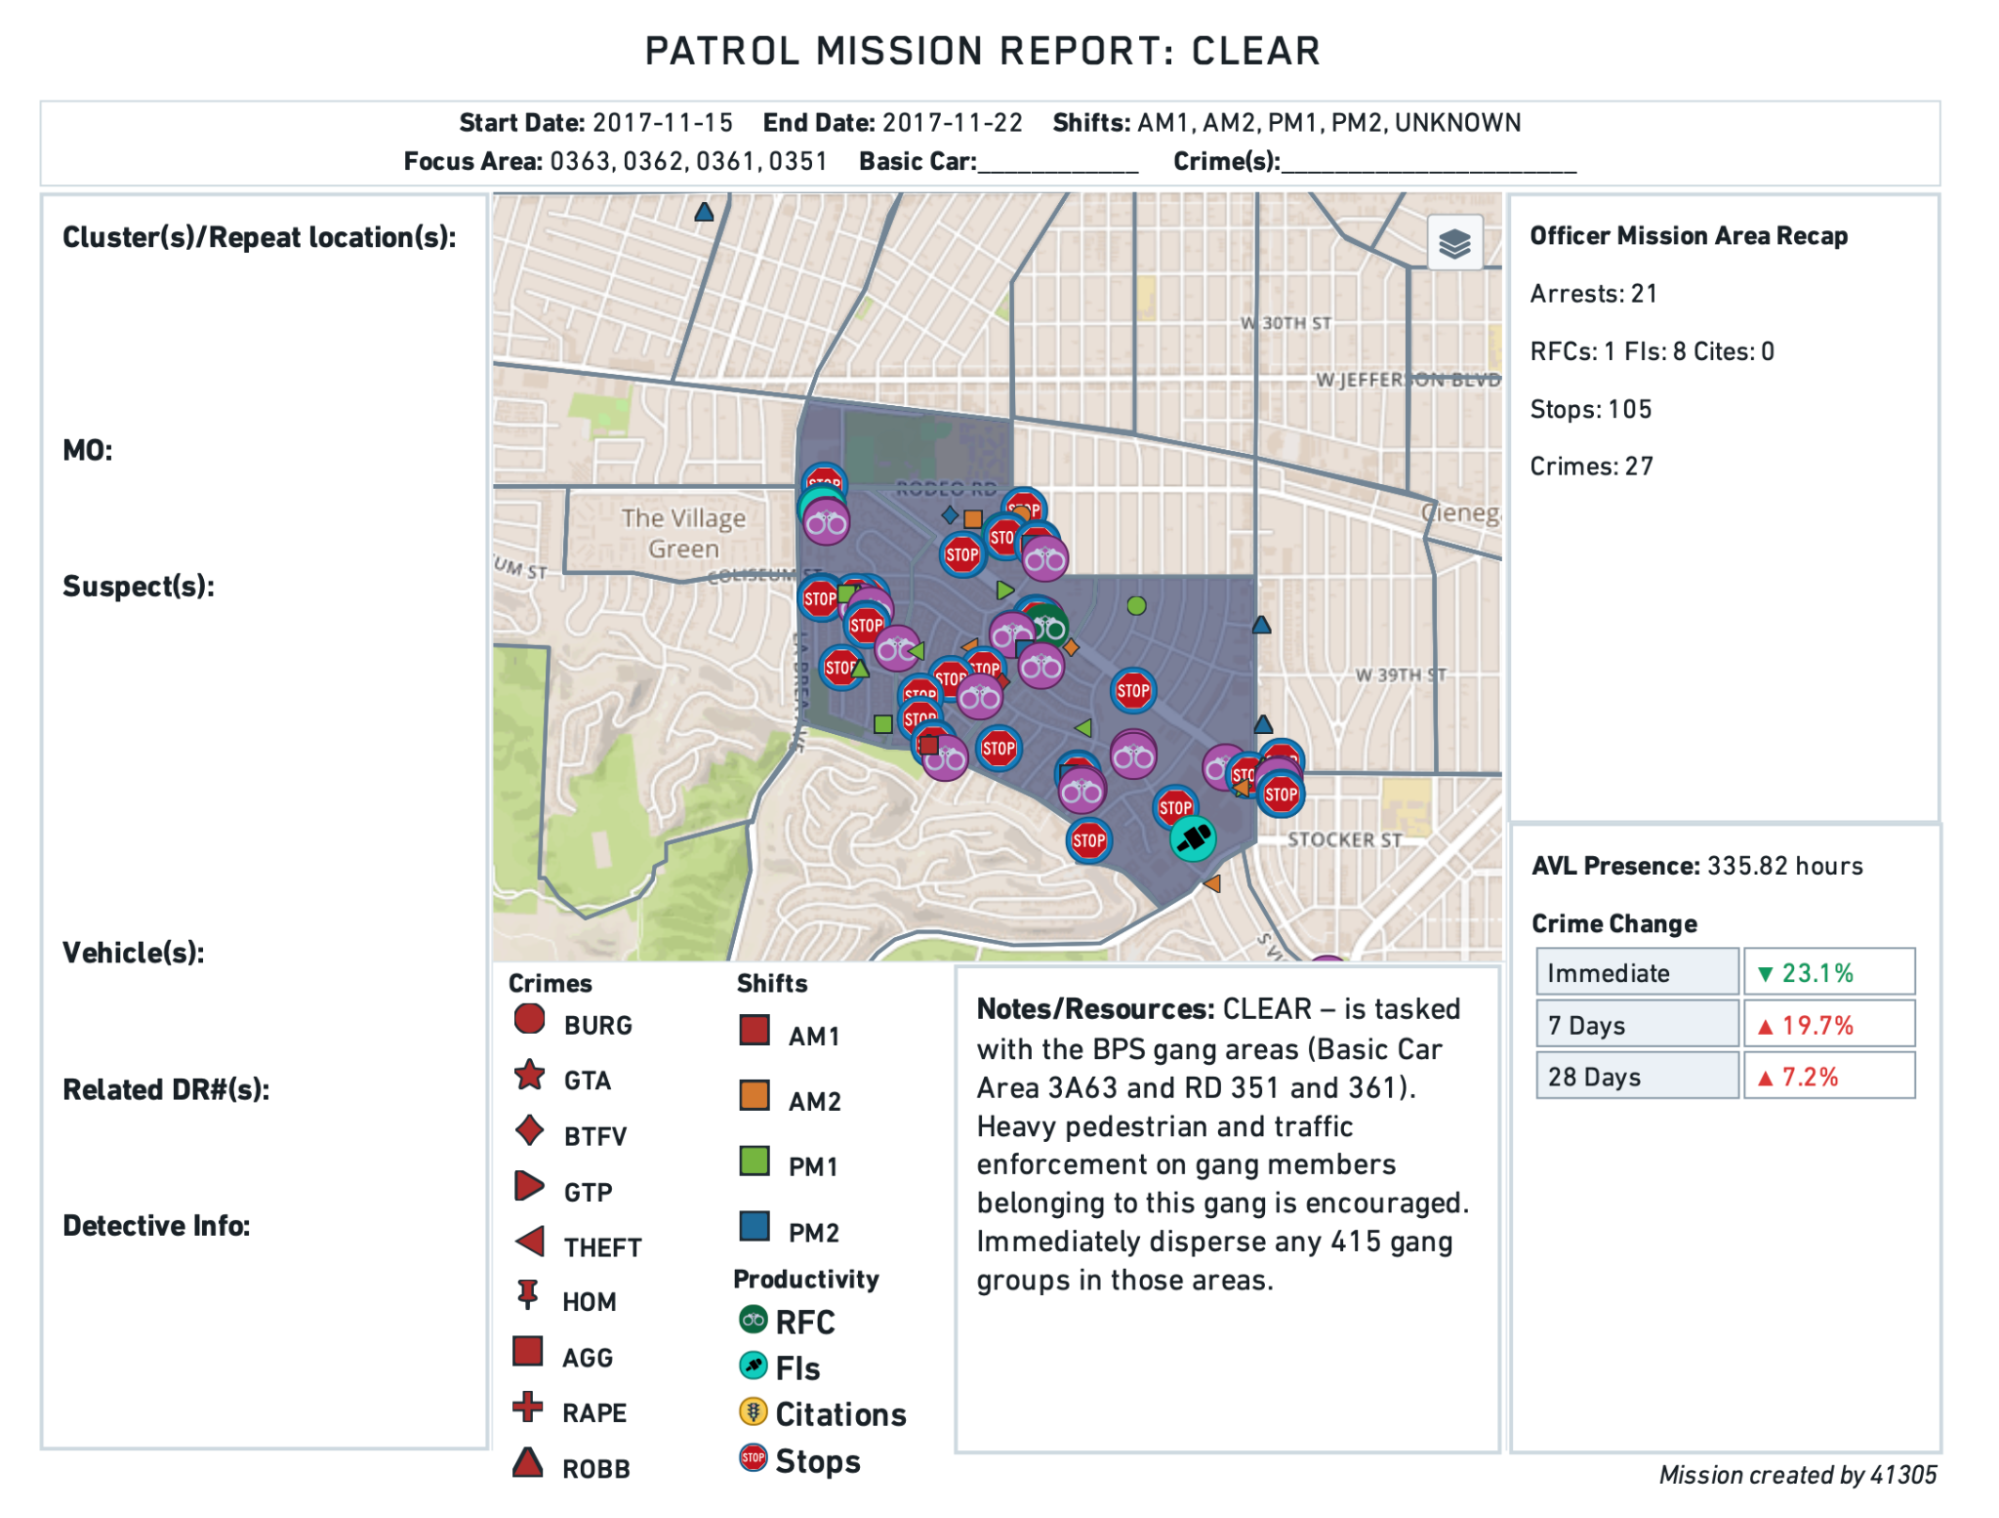 Patrol Mission Report generated by Palantir for LAPD shows hundreds of arrests in a designated target zone.